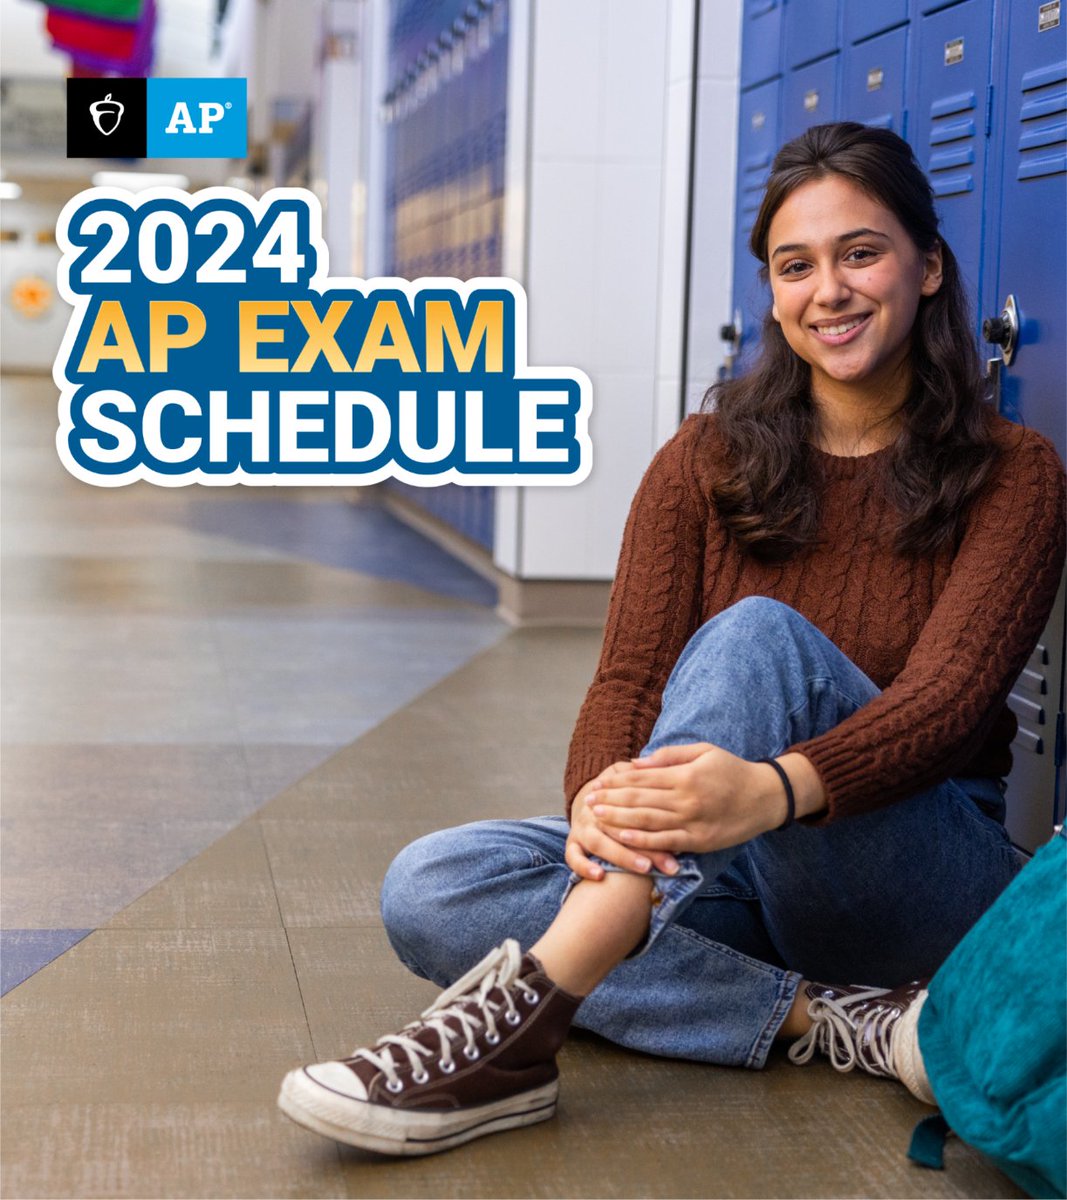 #APStudents: This year’s #APExams schedule is now available. Save the dates! 🗓️ spr.ly/6017kWyQf